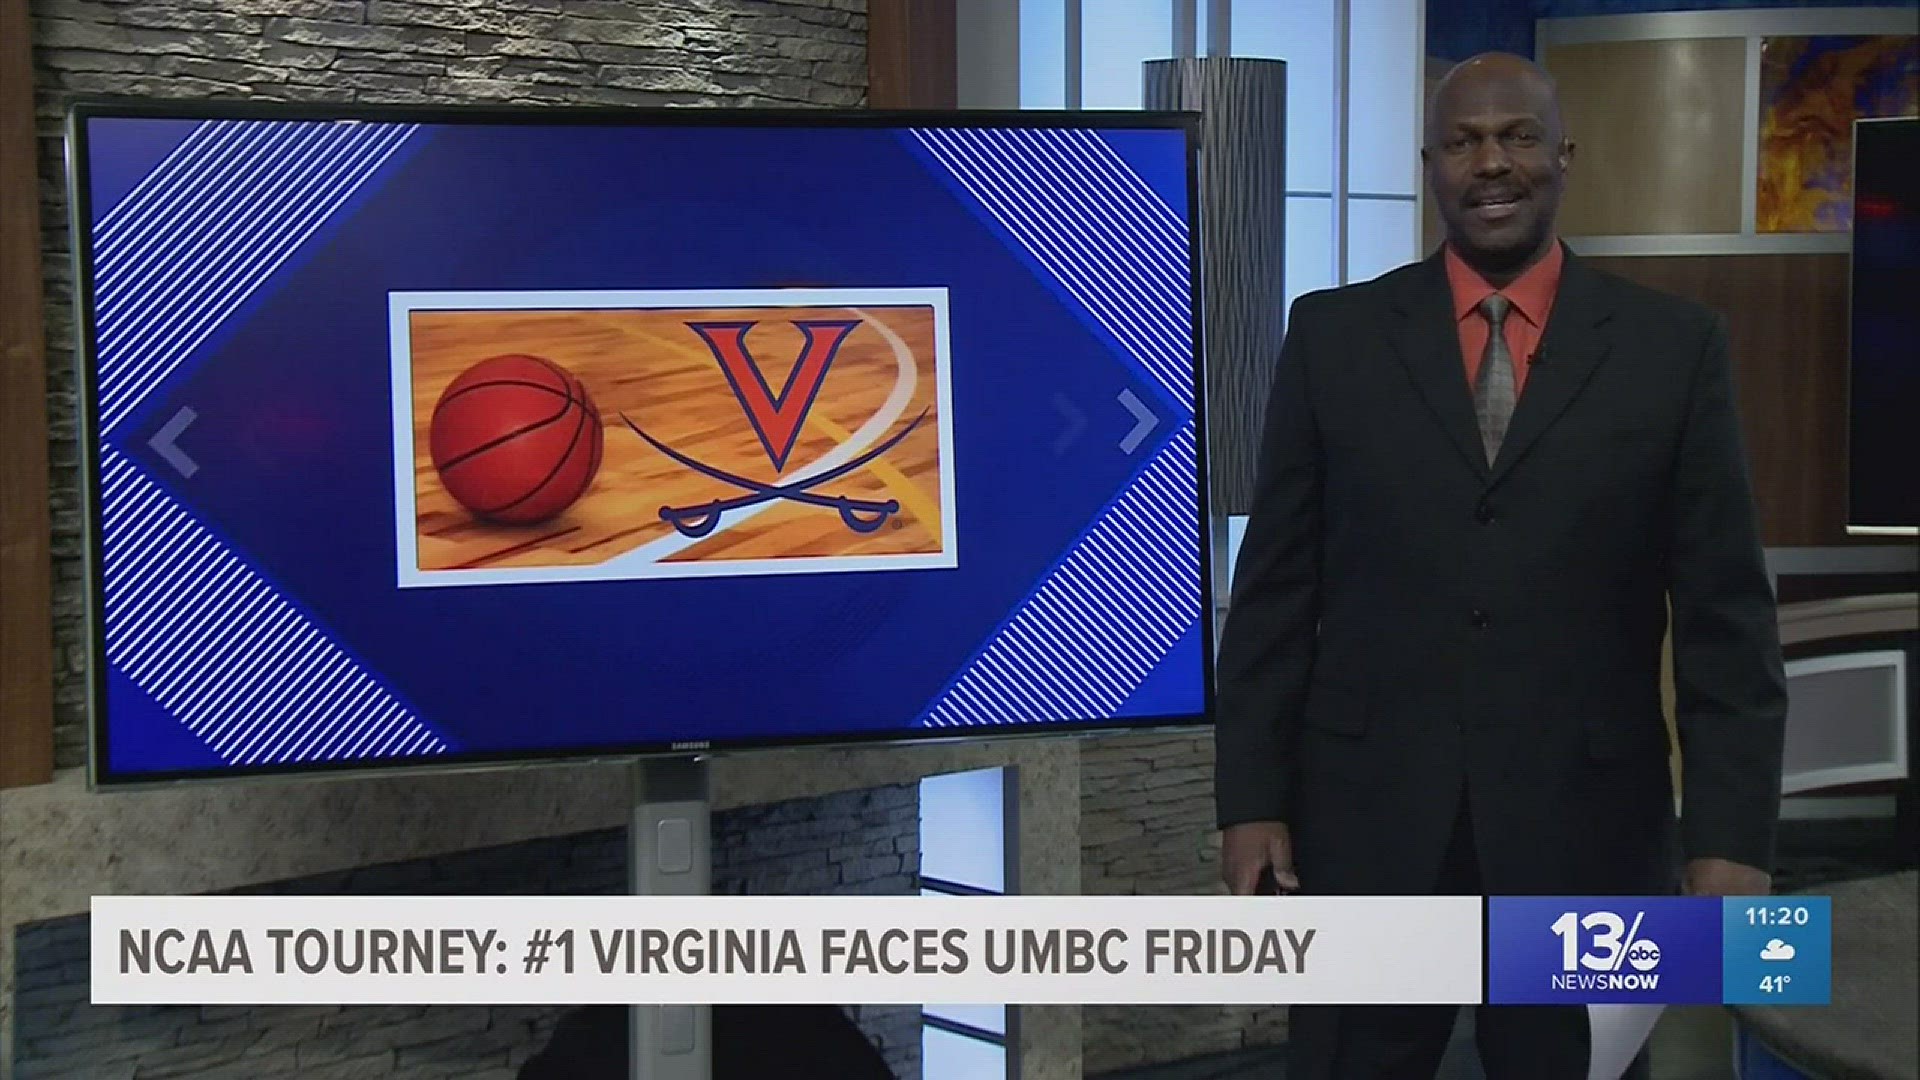 A day after winning their 3rd ACC Tournament title, top ranked Virginia got the overall #1 seed for the NCAA Tournament and will face UMBC in the South Region Friday from Charlotte, North Carolina.